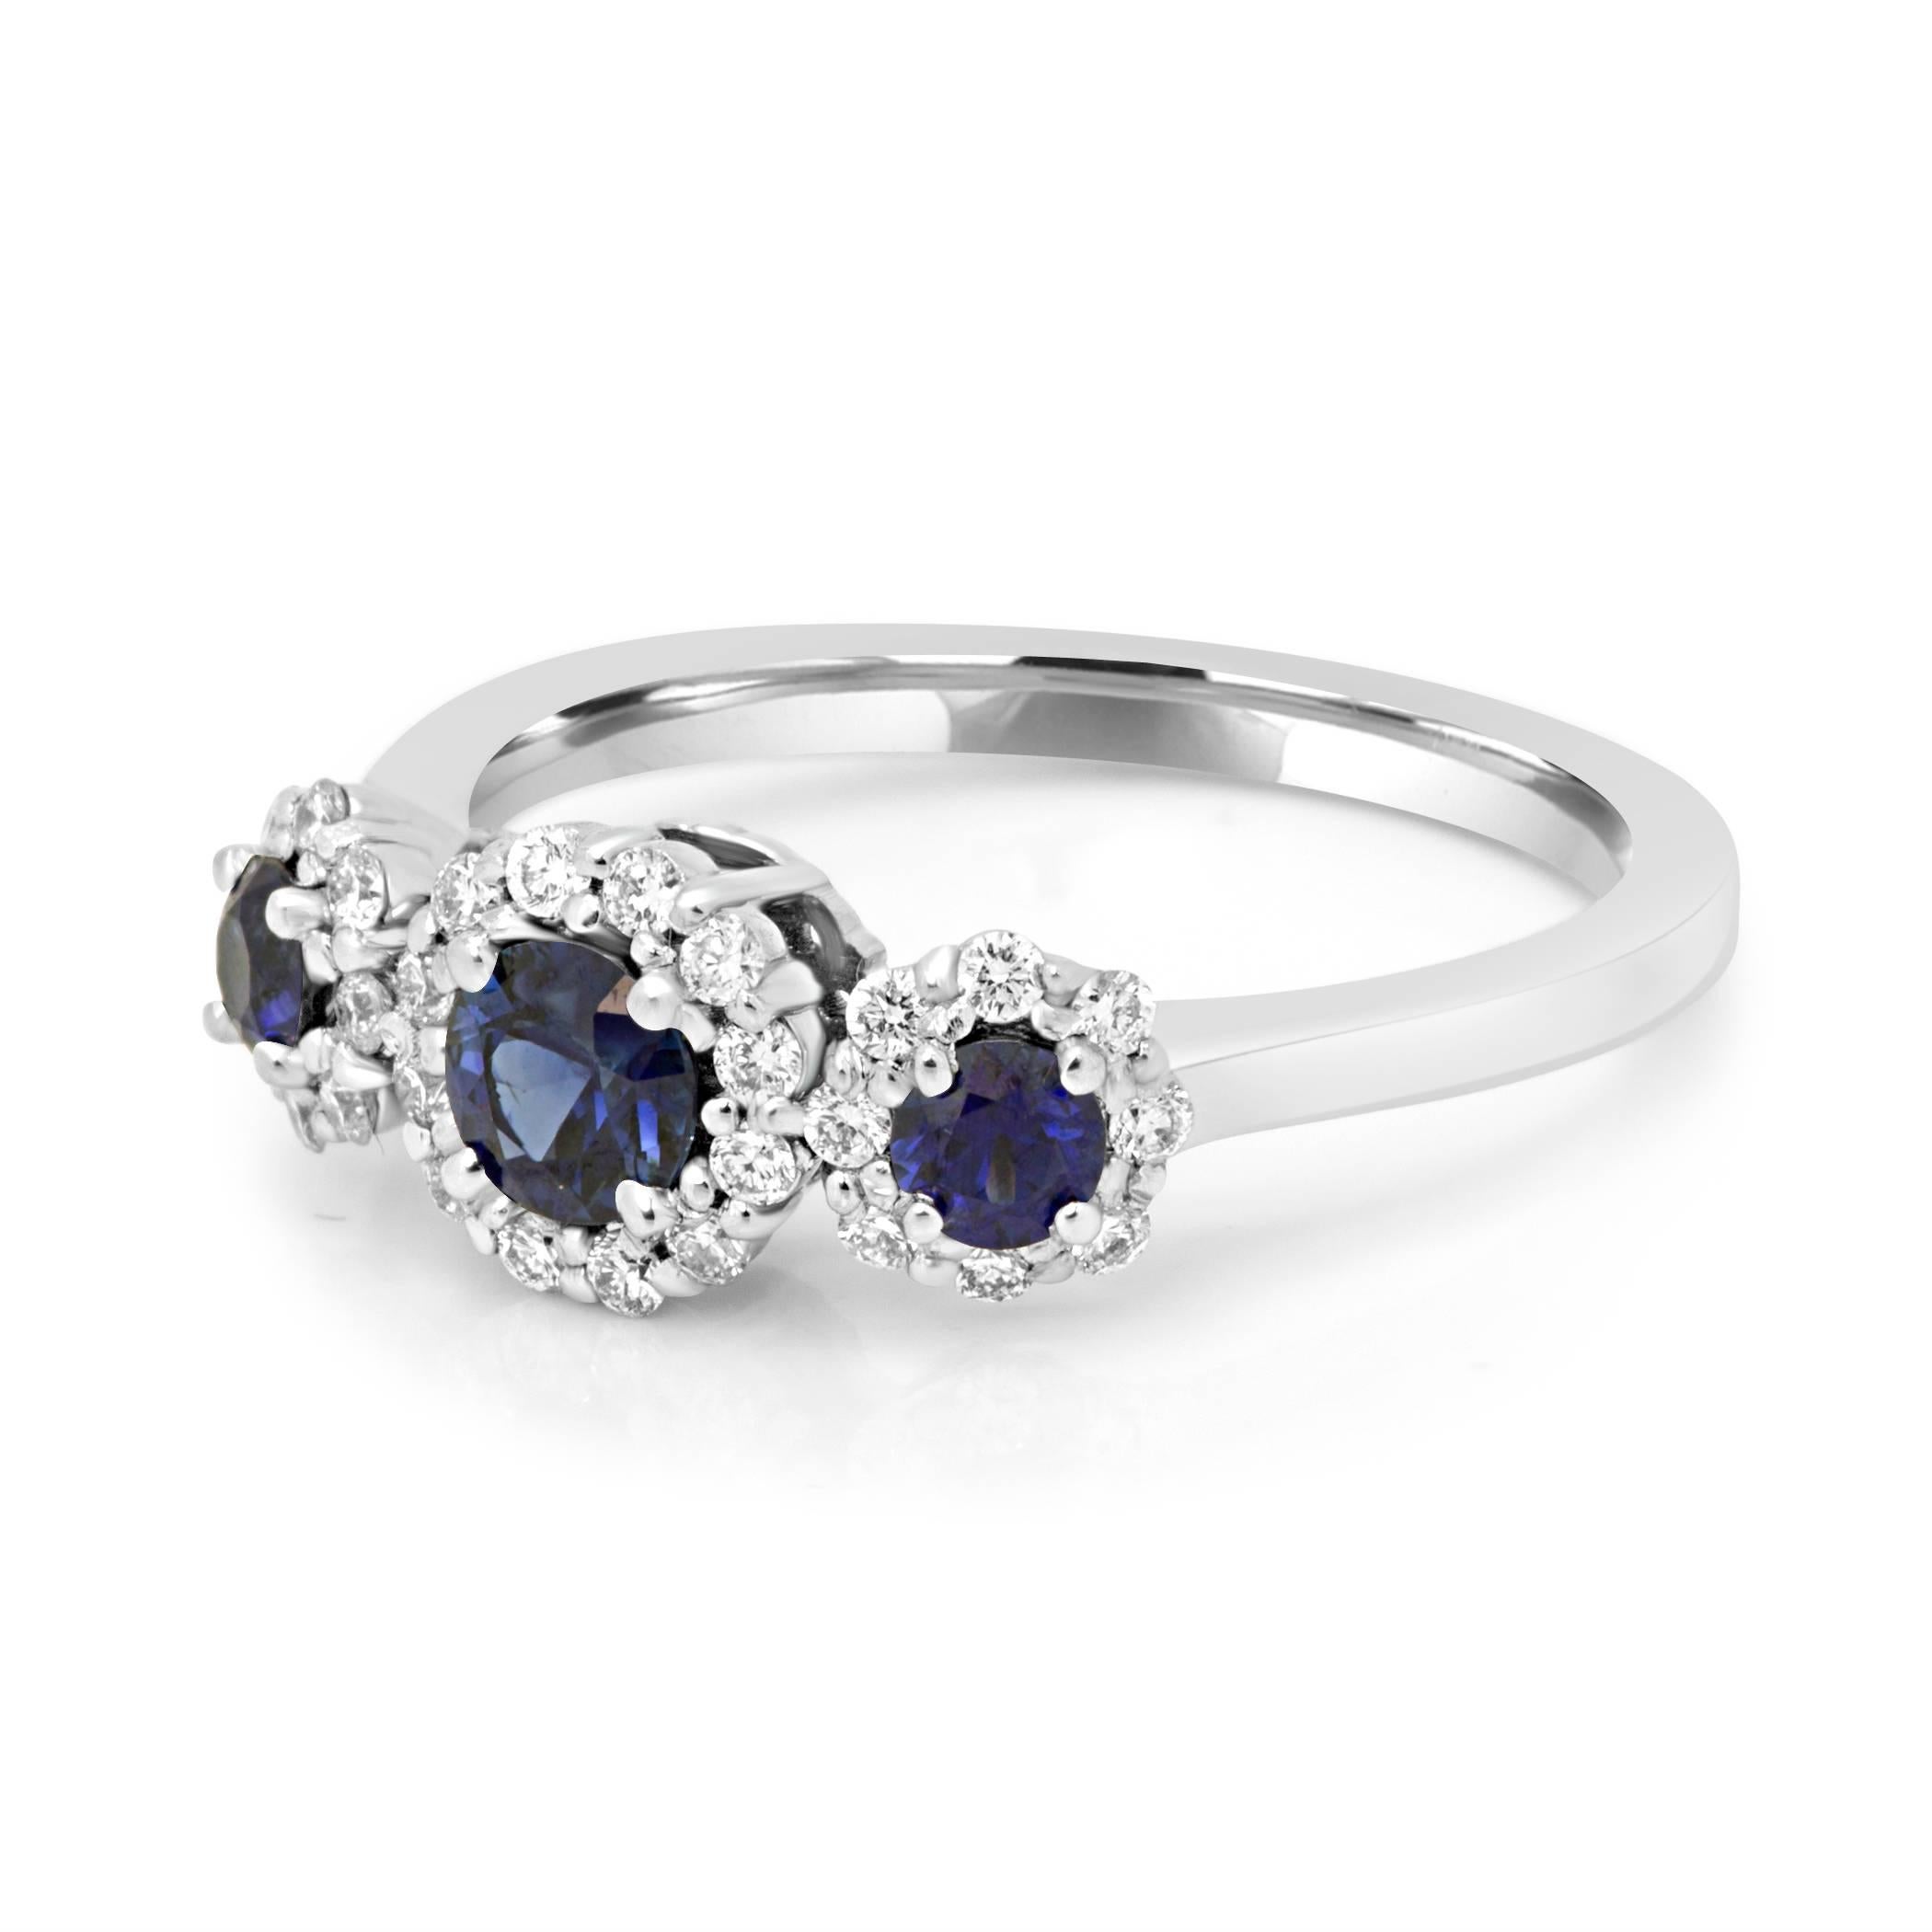 3 Natural Blue Sapphire Round 0.62 Carat Encircled in Halo of White Diamond Round 0.28 Carat in 14K White Gold Three Stone Fashion Cocktail Ring perfect for everyday wear.

MADE IN USA.

Total Stones Weight 0.90 Carat

Style available in different